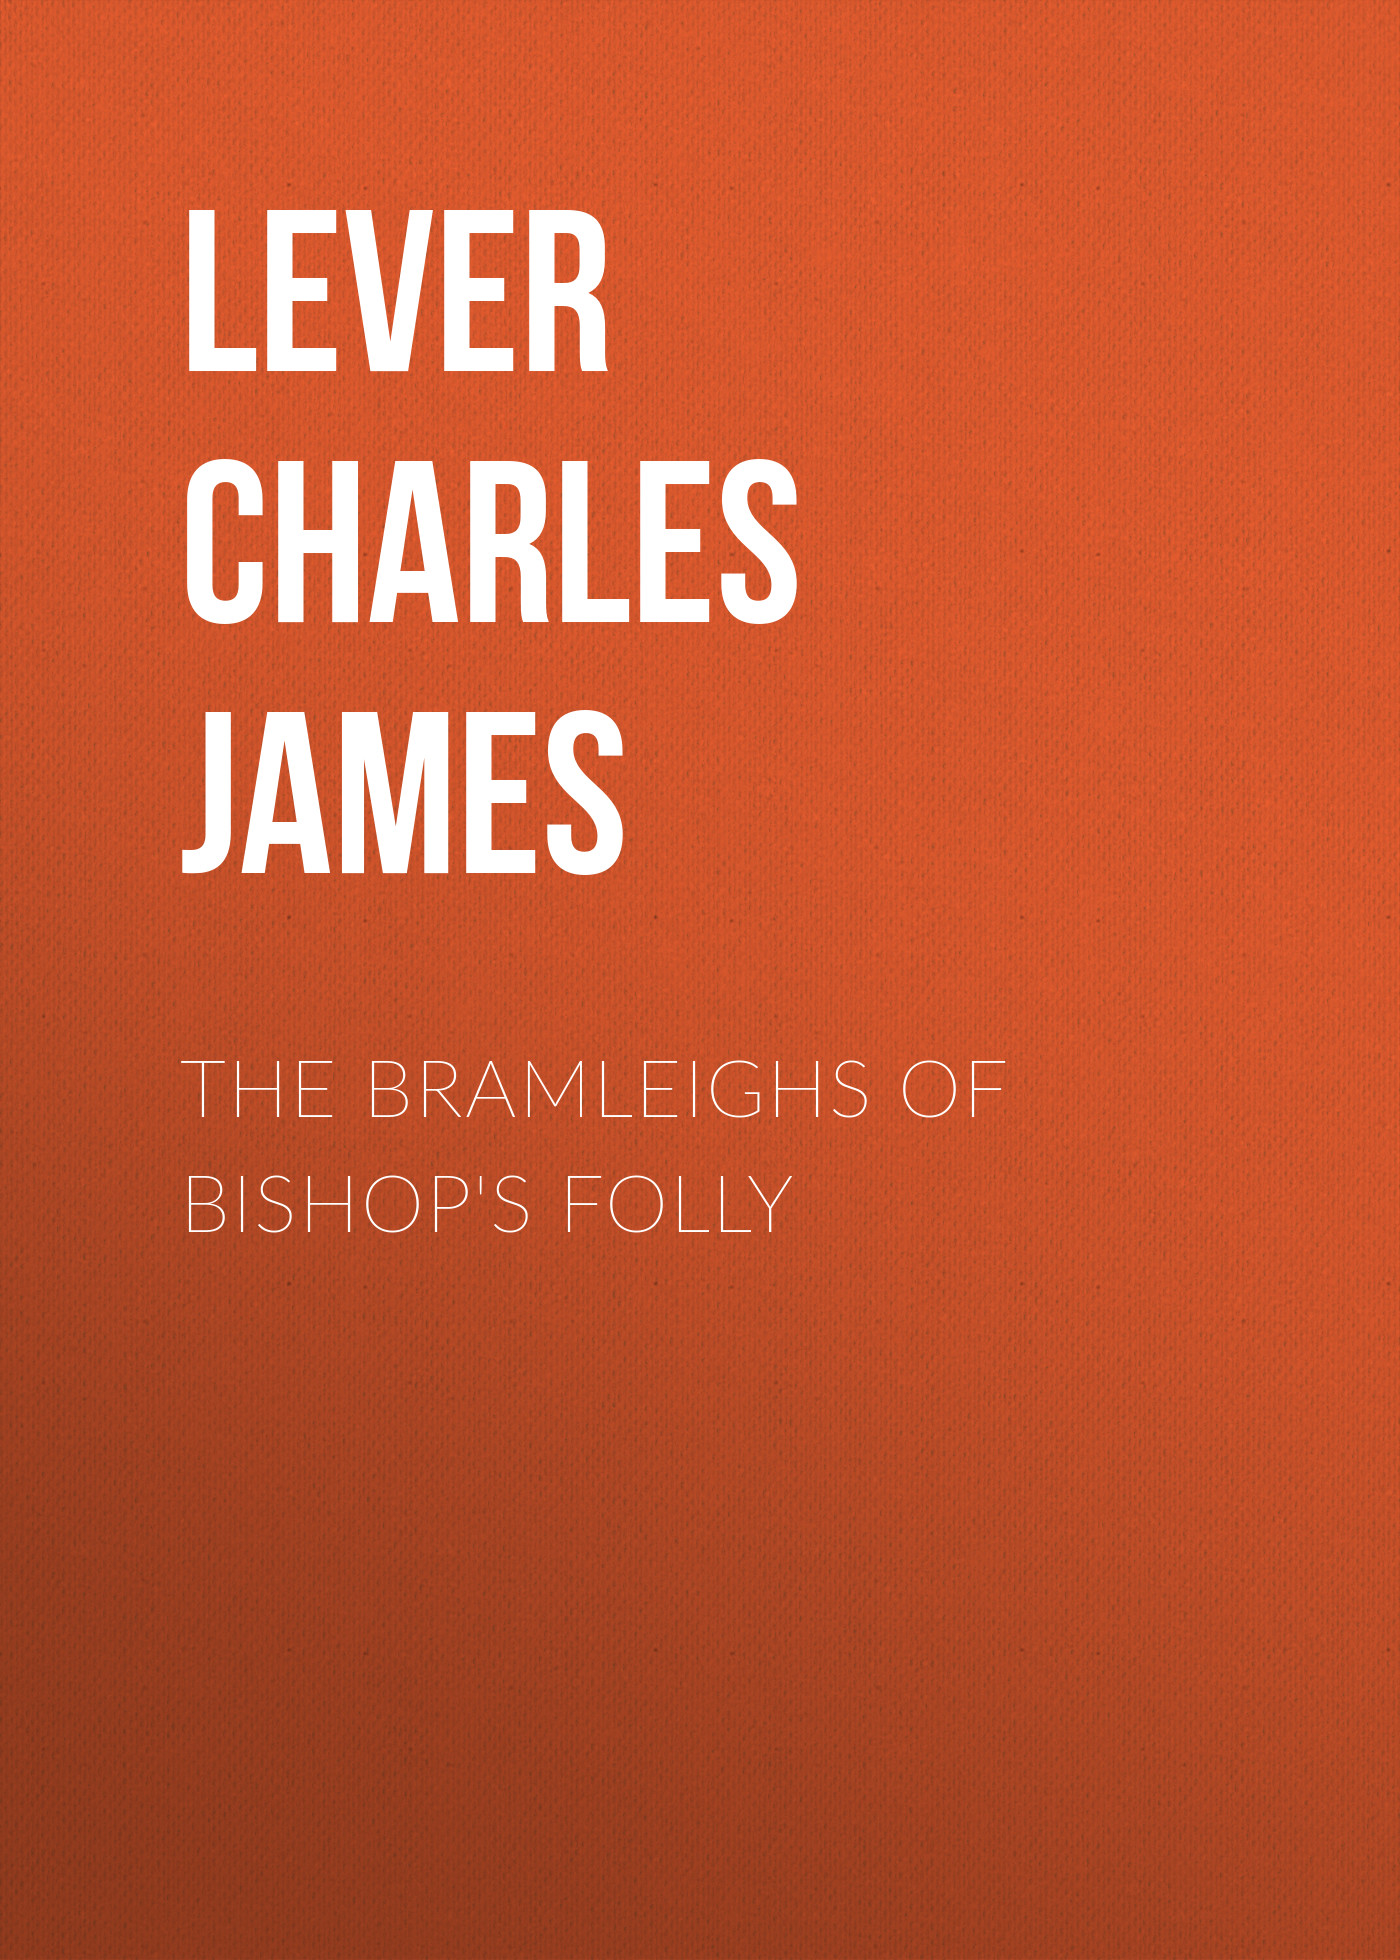 Lever Charles James The Bramleighs of Bishop's Folly